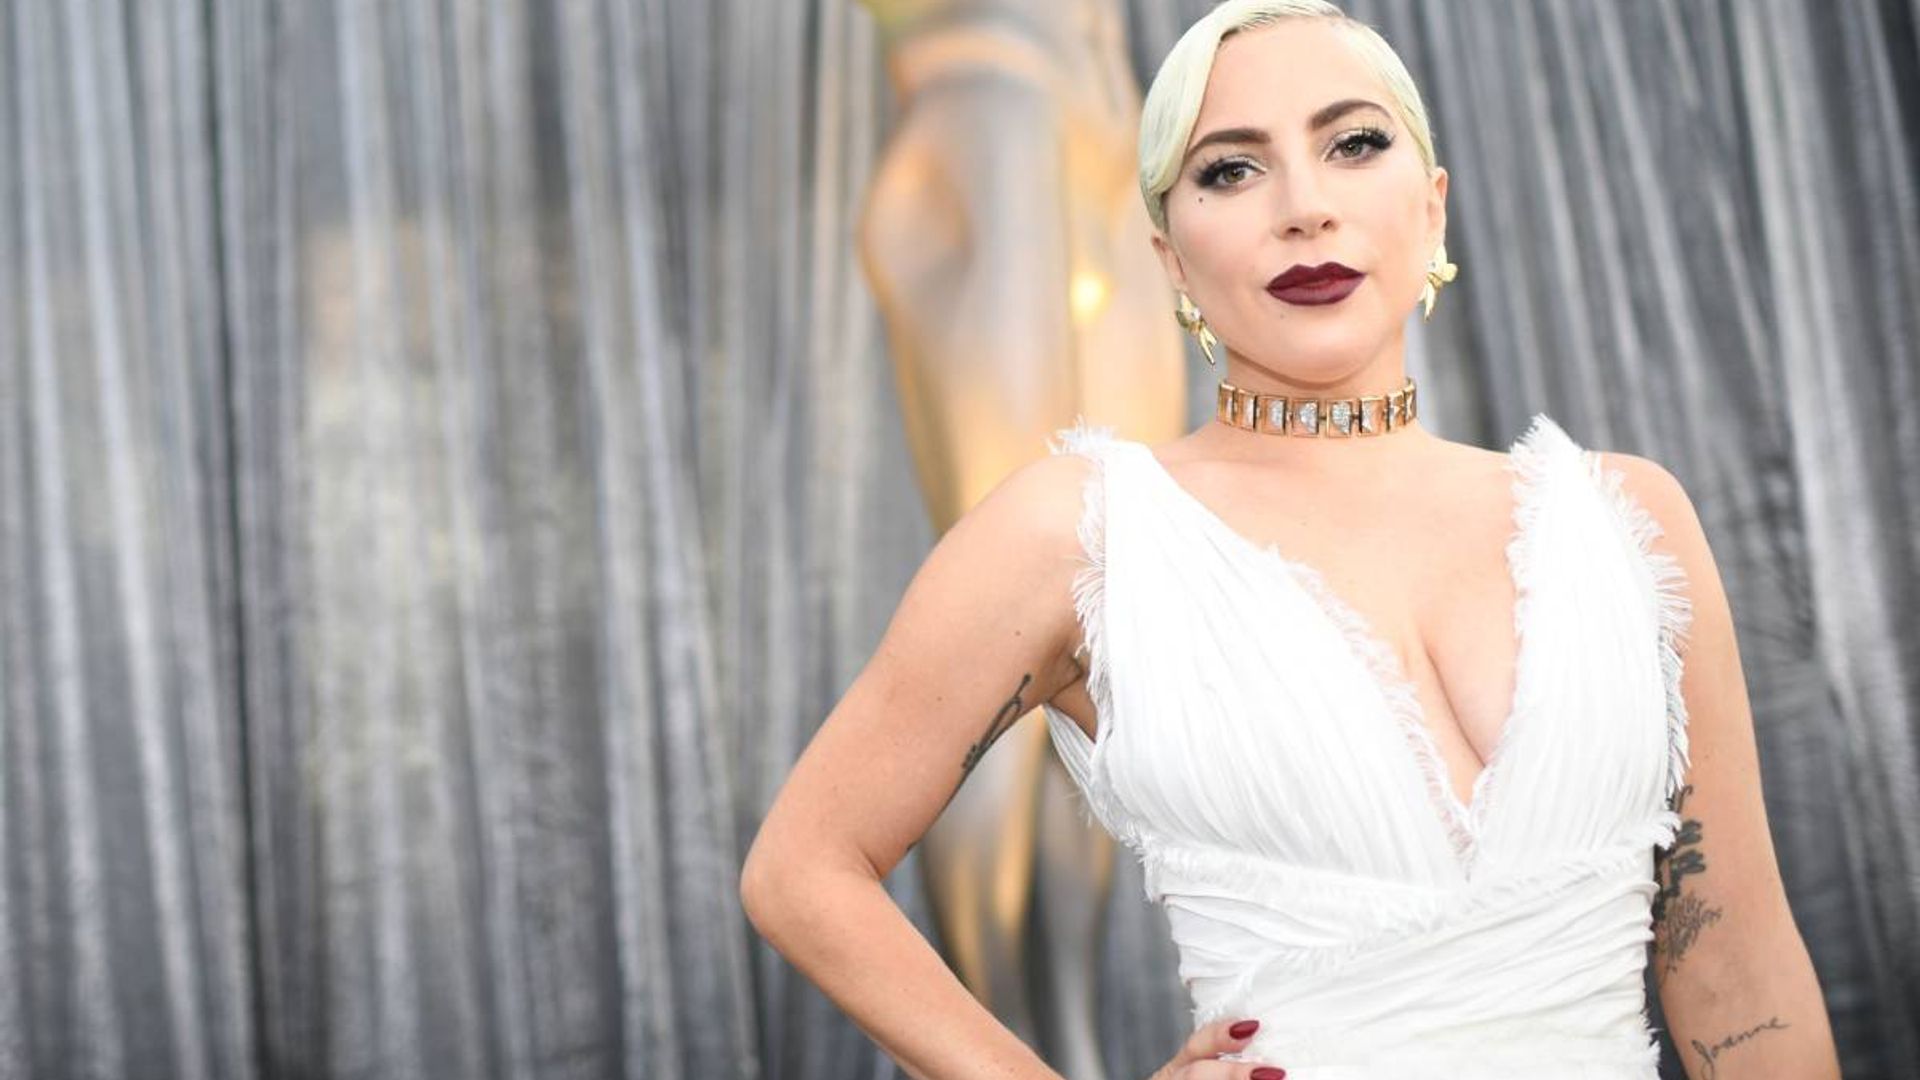 Lady Gaga flashes her sculpted abs in a look you would never expect